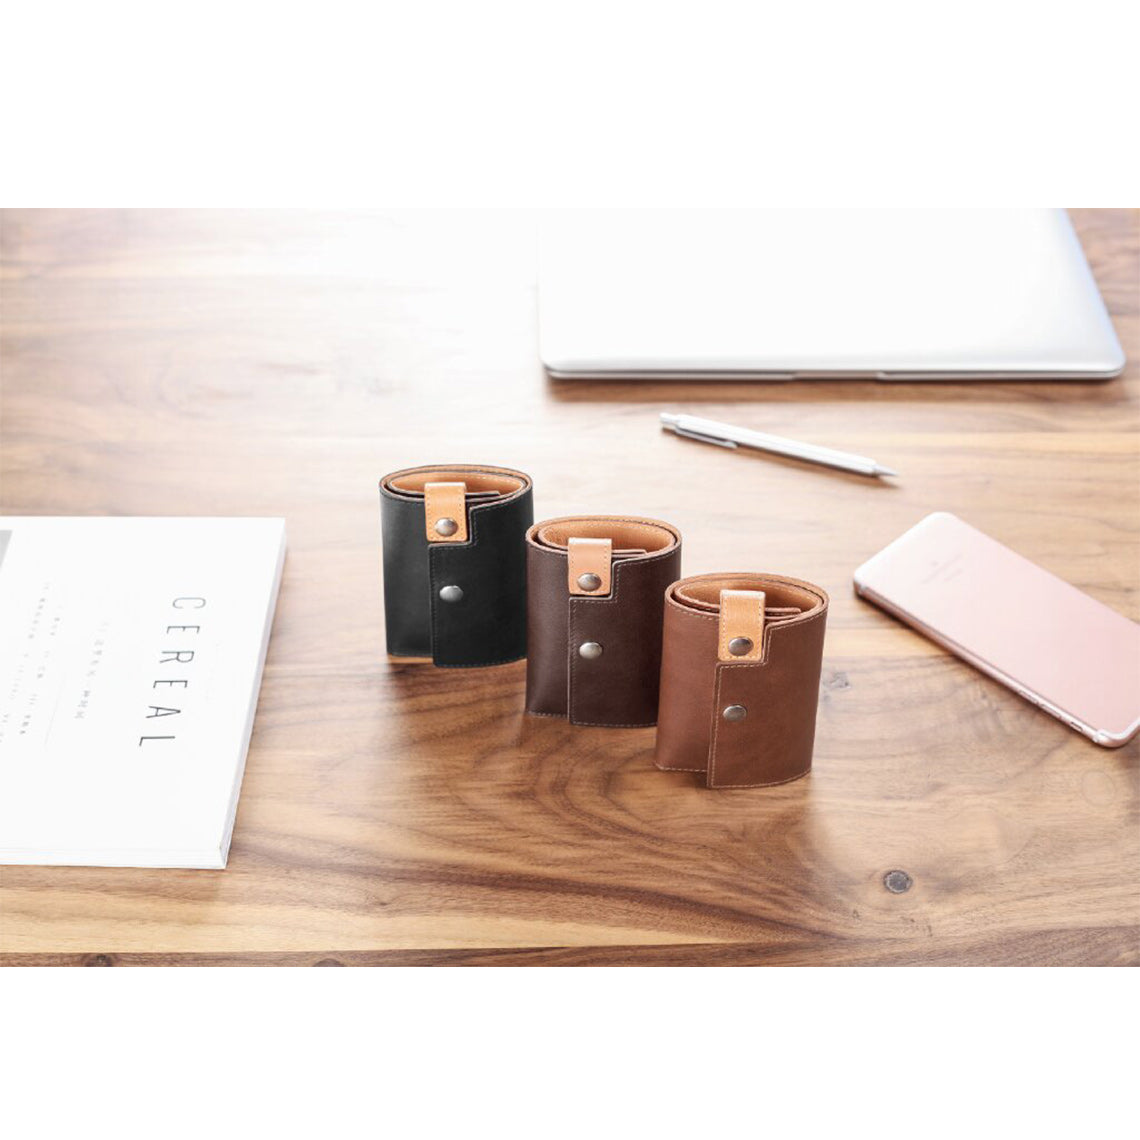 Real Leather Card Holder & Money Clip | Black & Brown - POPSEWING™